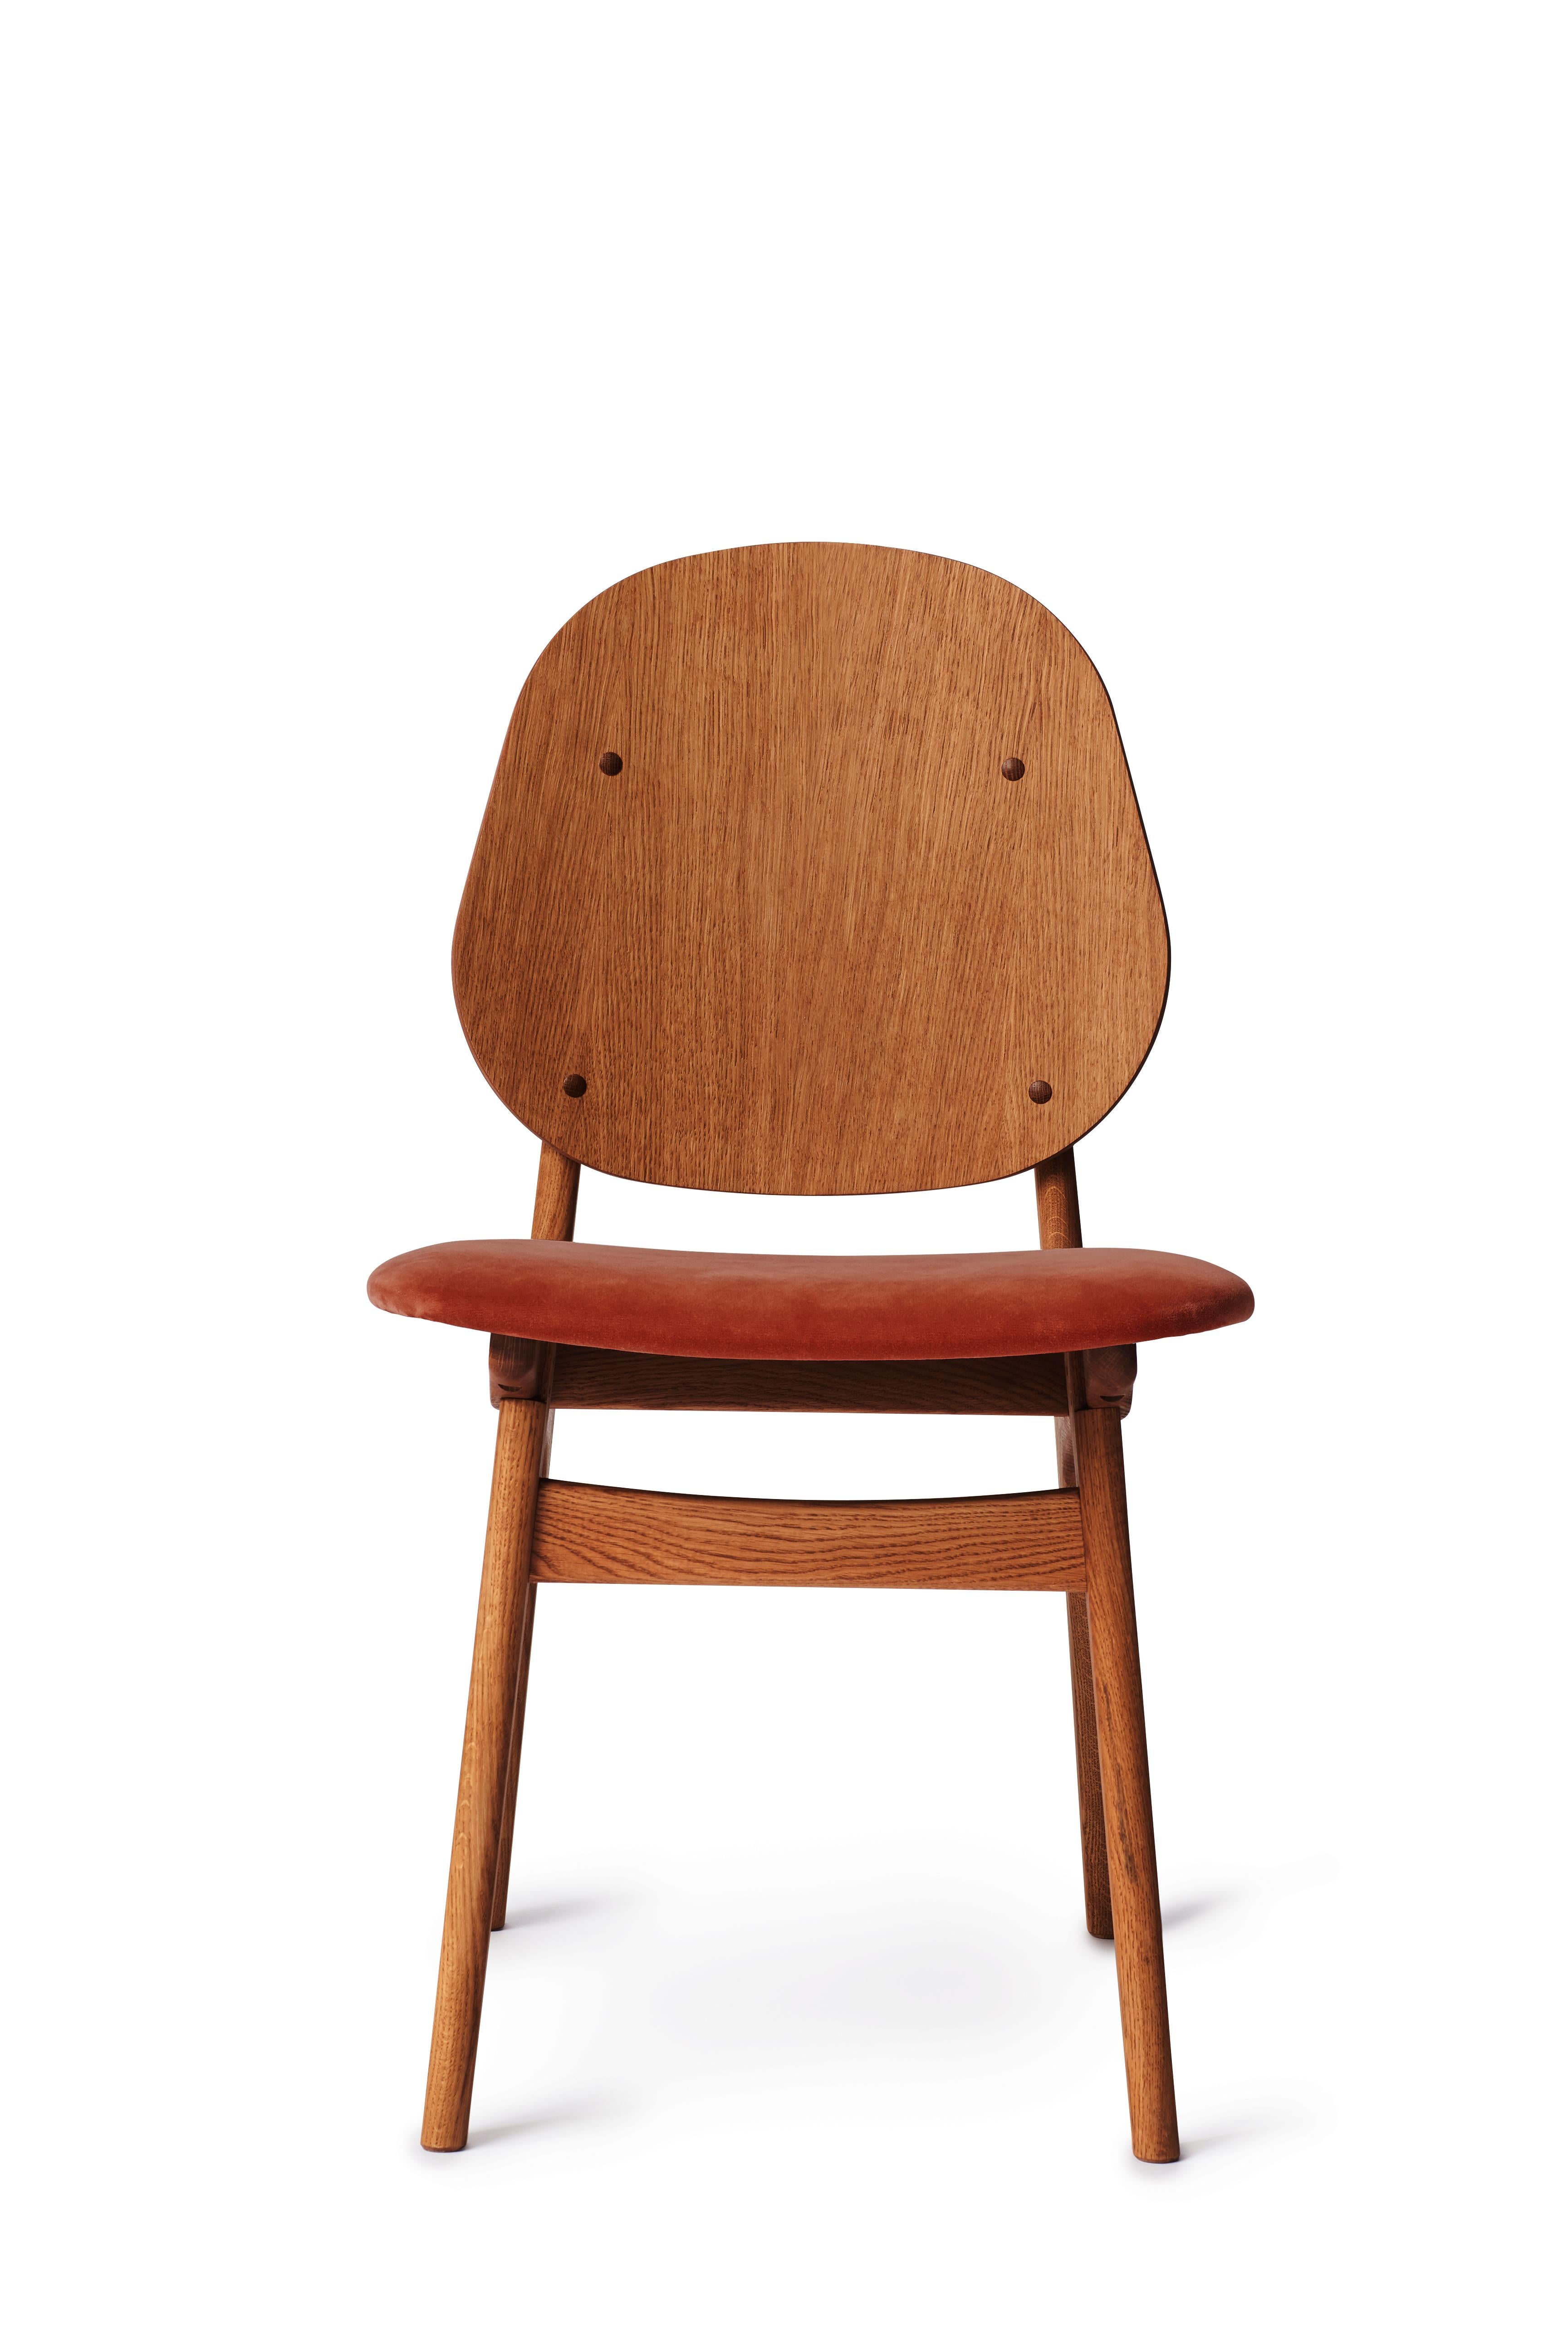 For Sale: Red (Ritz 3701) Noble Chair in Teak Oak with Upholstery, by Arne Hovmand-Olsen from Warm Nordic